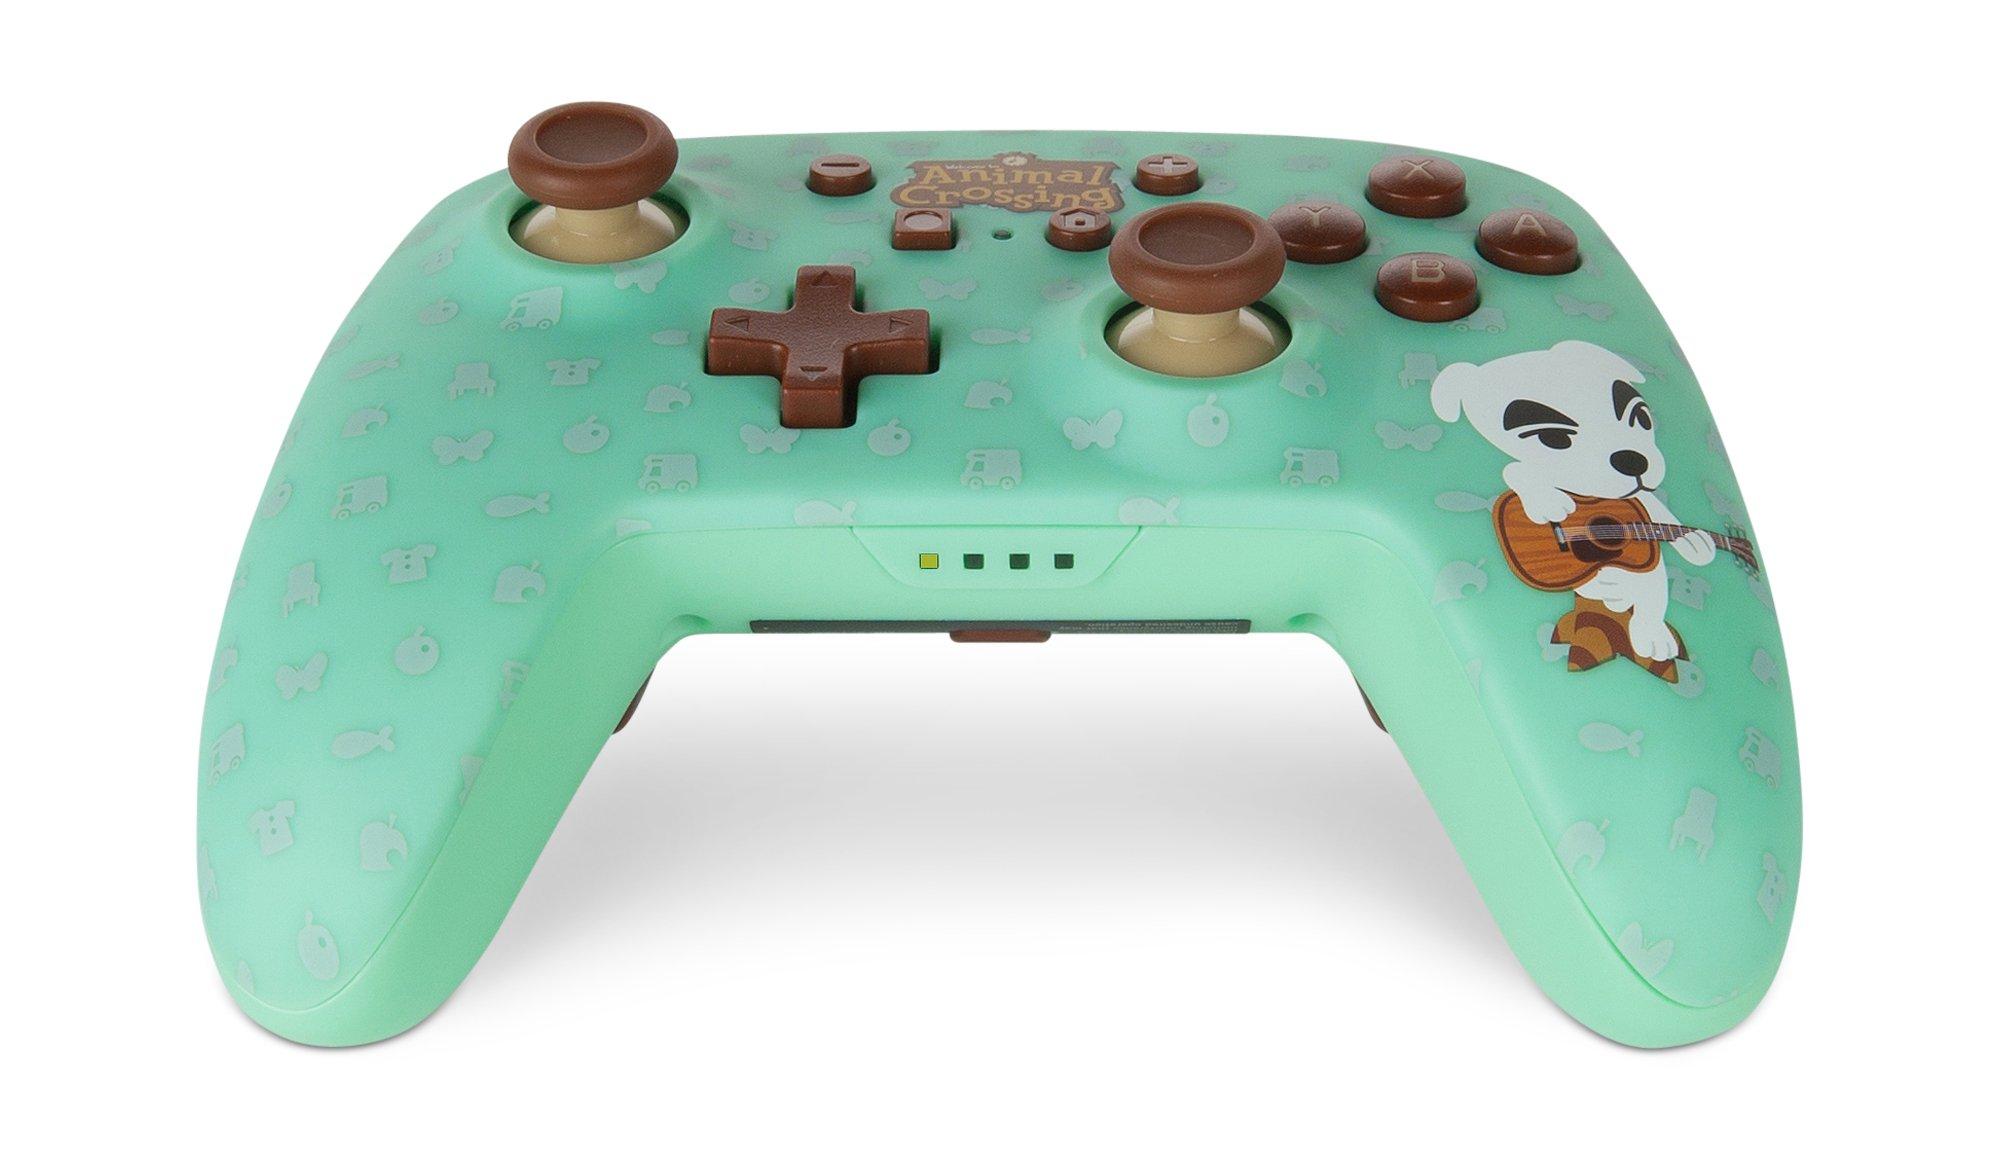 animal crossing nintendo switch controllers